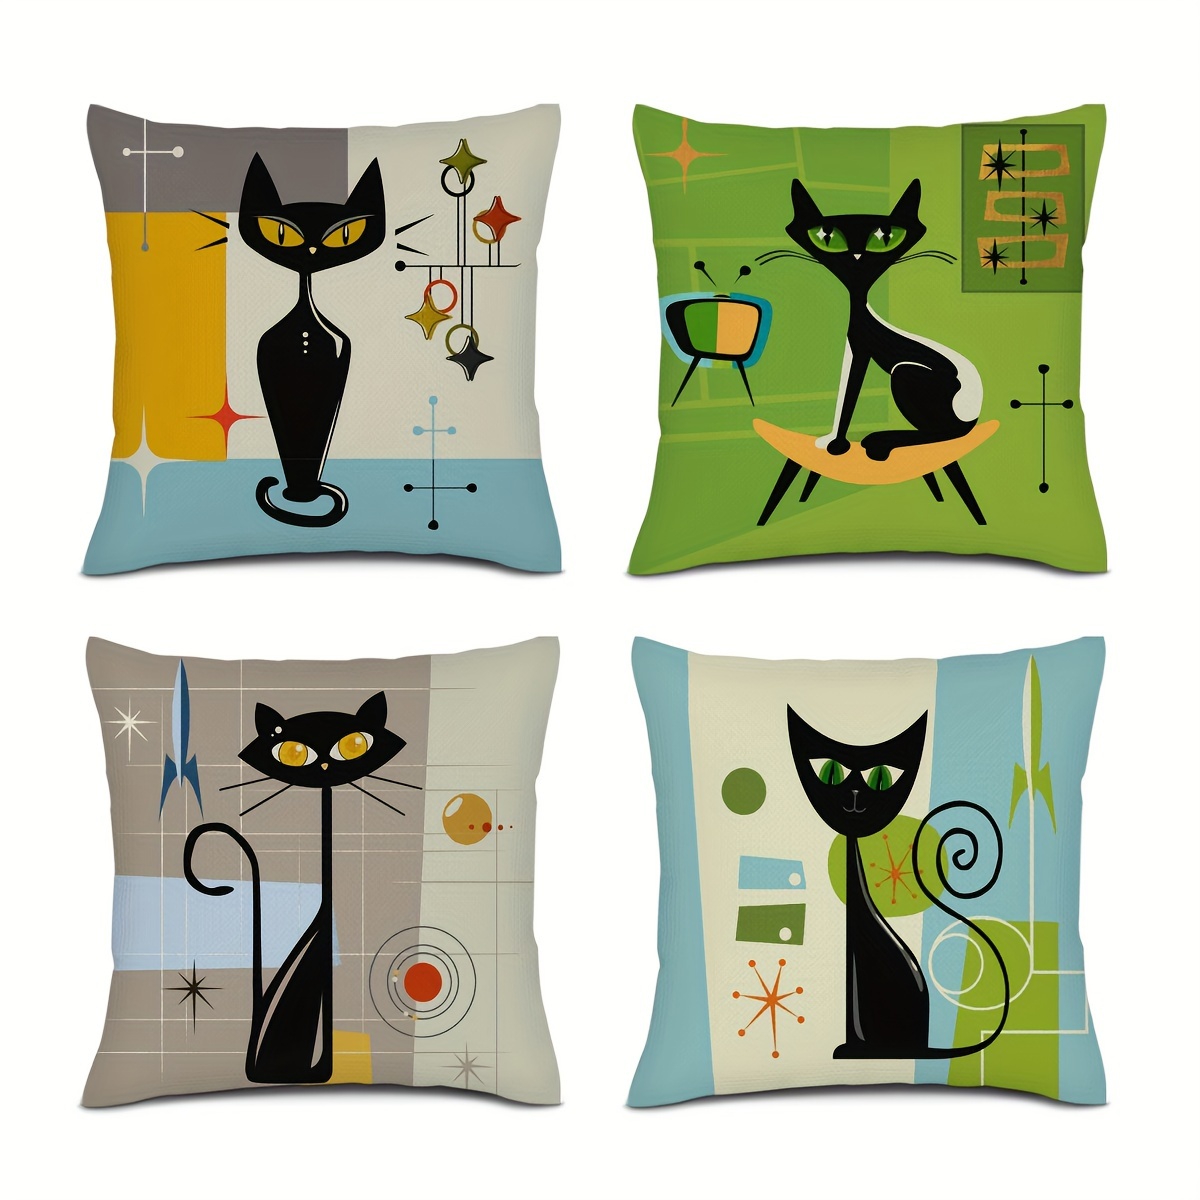 

Set Of 4 Contemporary Cat Art Throw Pillow Covers, 18x18 Inch, Hypoallergenic Polyester With Zipper Closure, Machine Washable Geometric-patterned Cushion Cases For Various Room Types